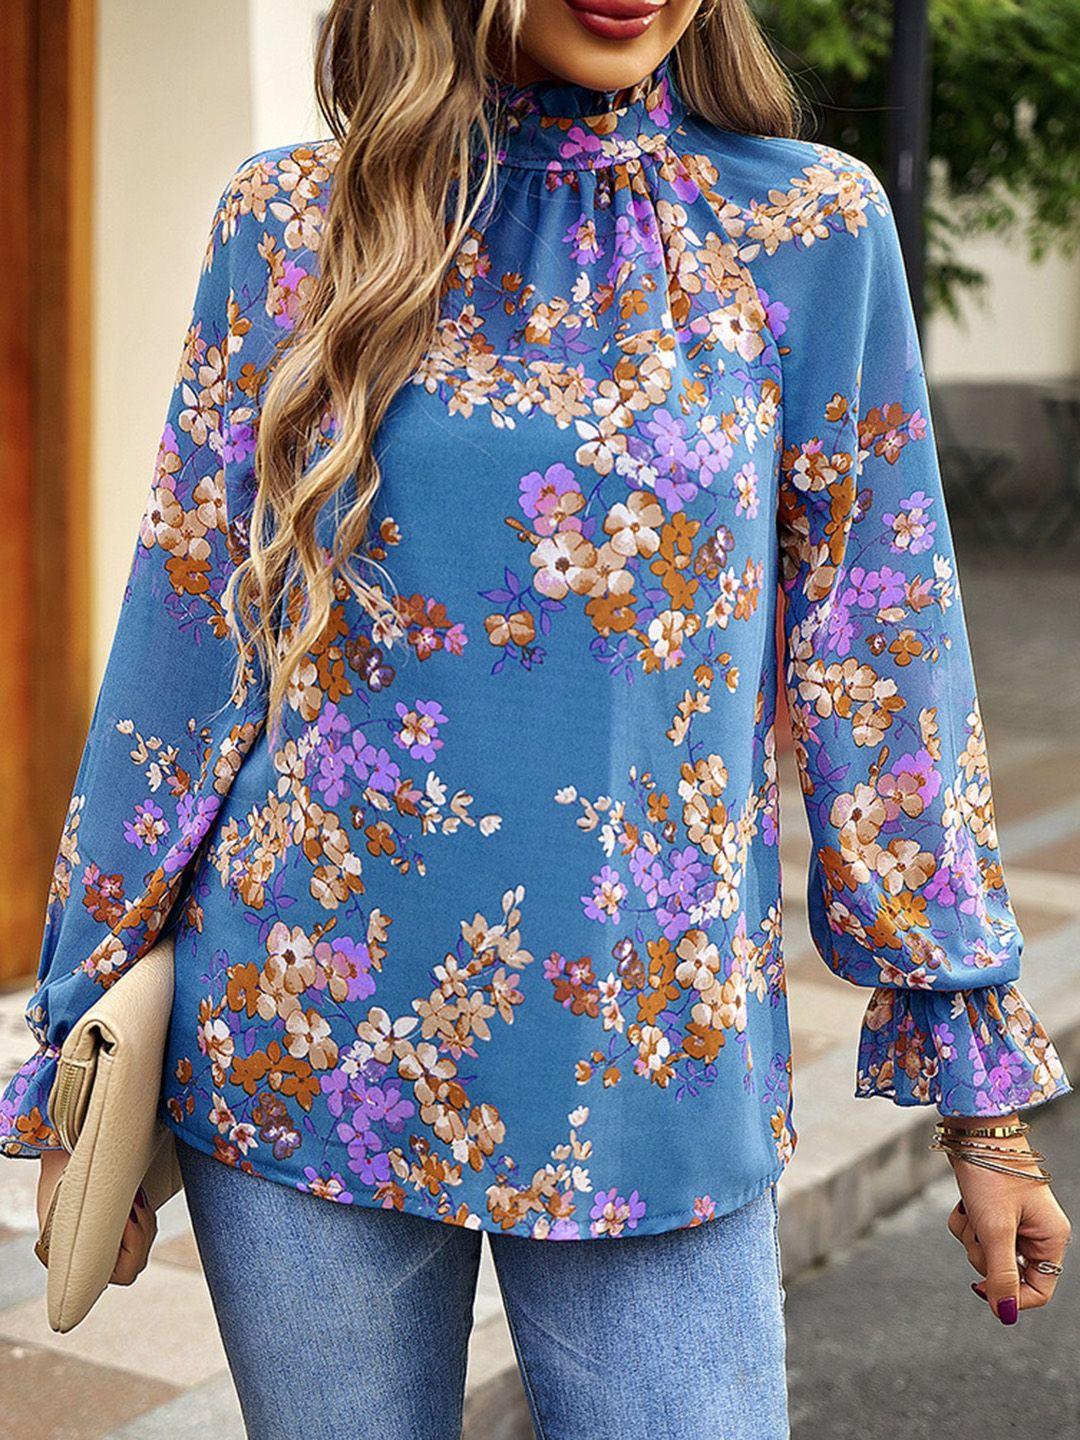 stylecast blue floral print bell sleeve top